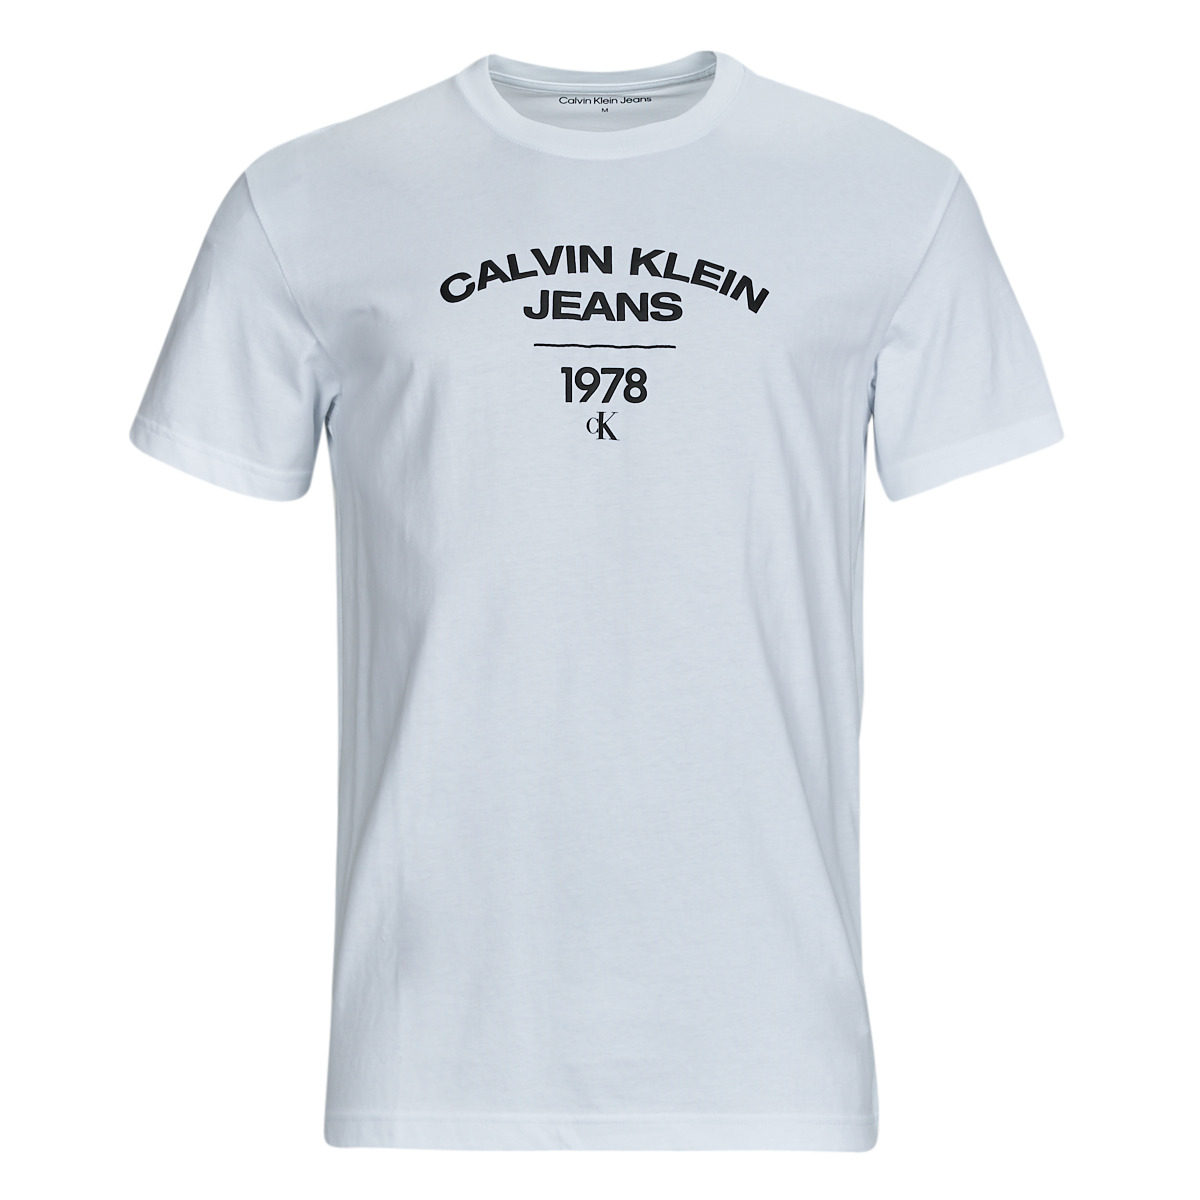 Calvin Klein Jeans Spartoo | NET t-shirts delivery short-sleeved White LOGO Free VARSITY - ! Men T-SHIRT - CURVE Clothing